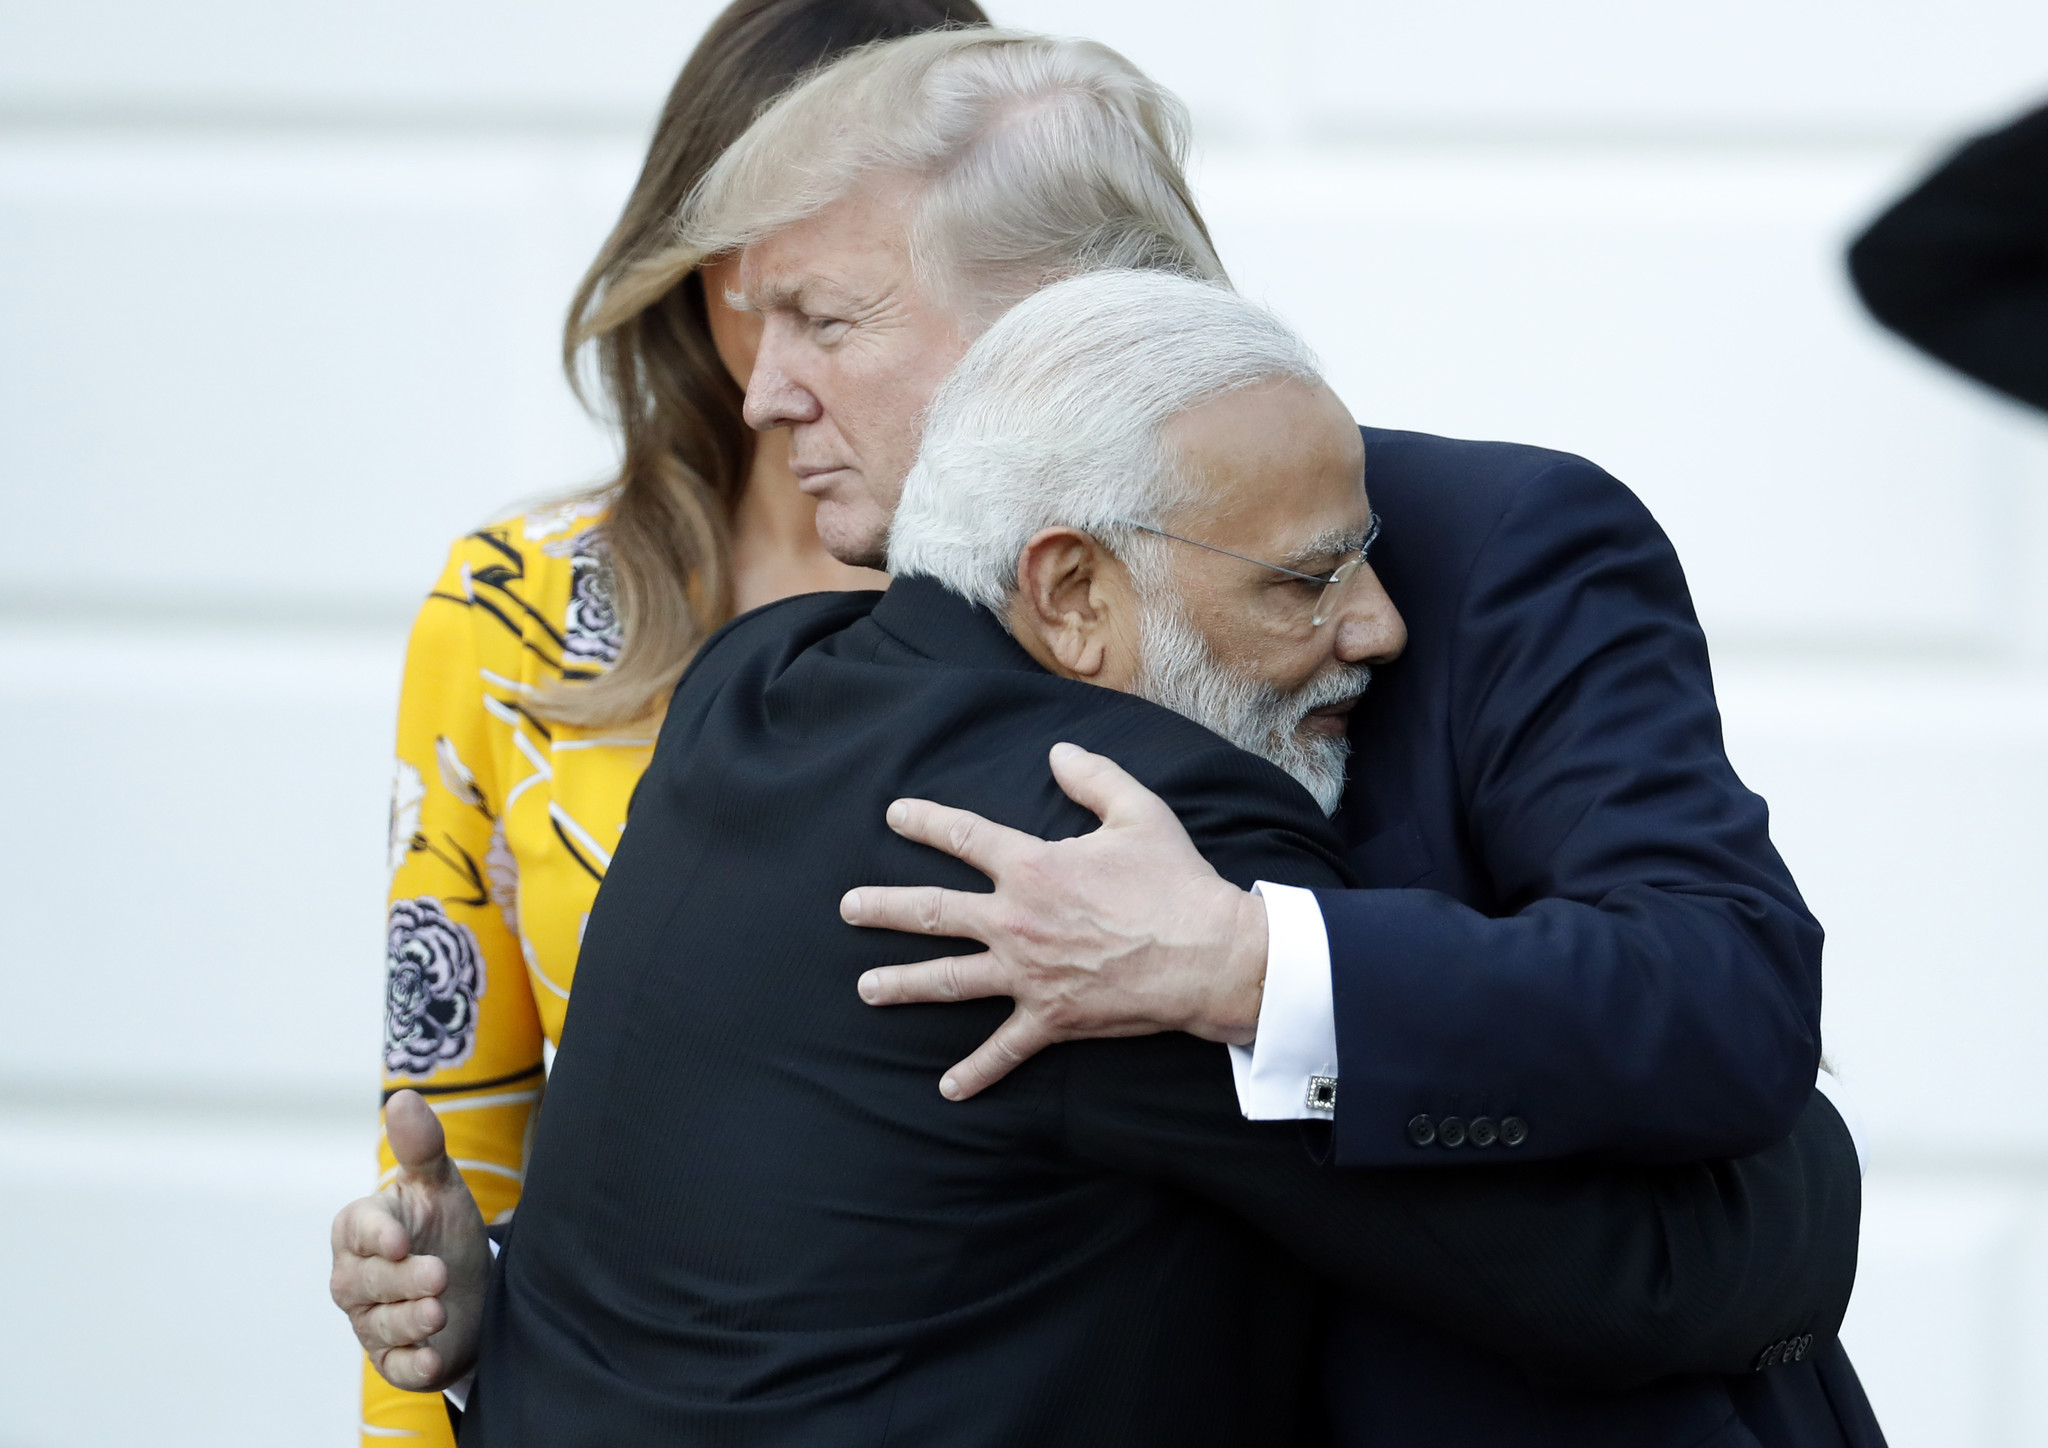 India Prime Minister Modi meets Trump with his usual 